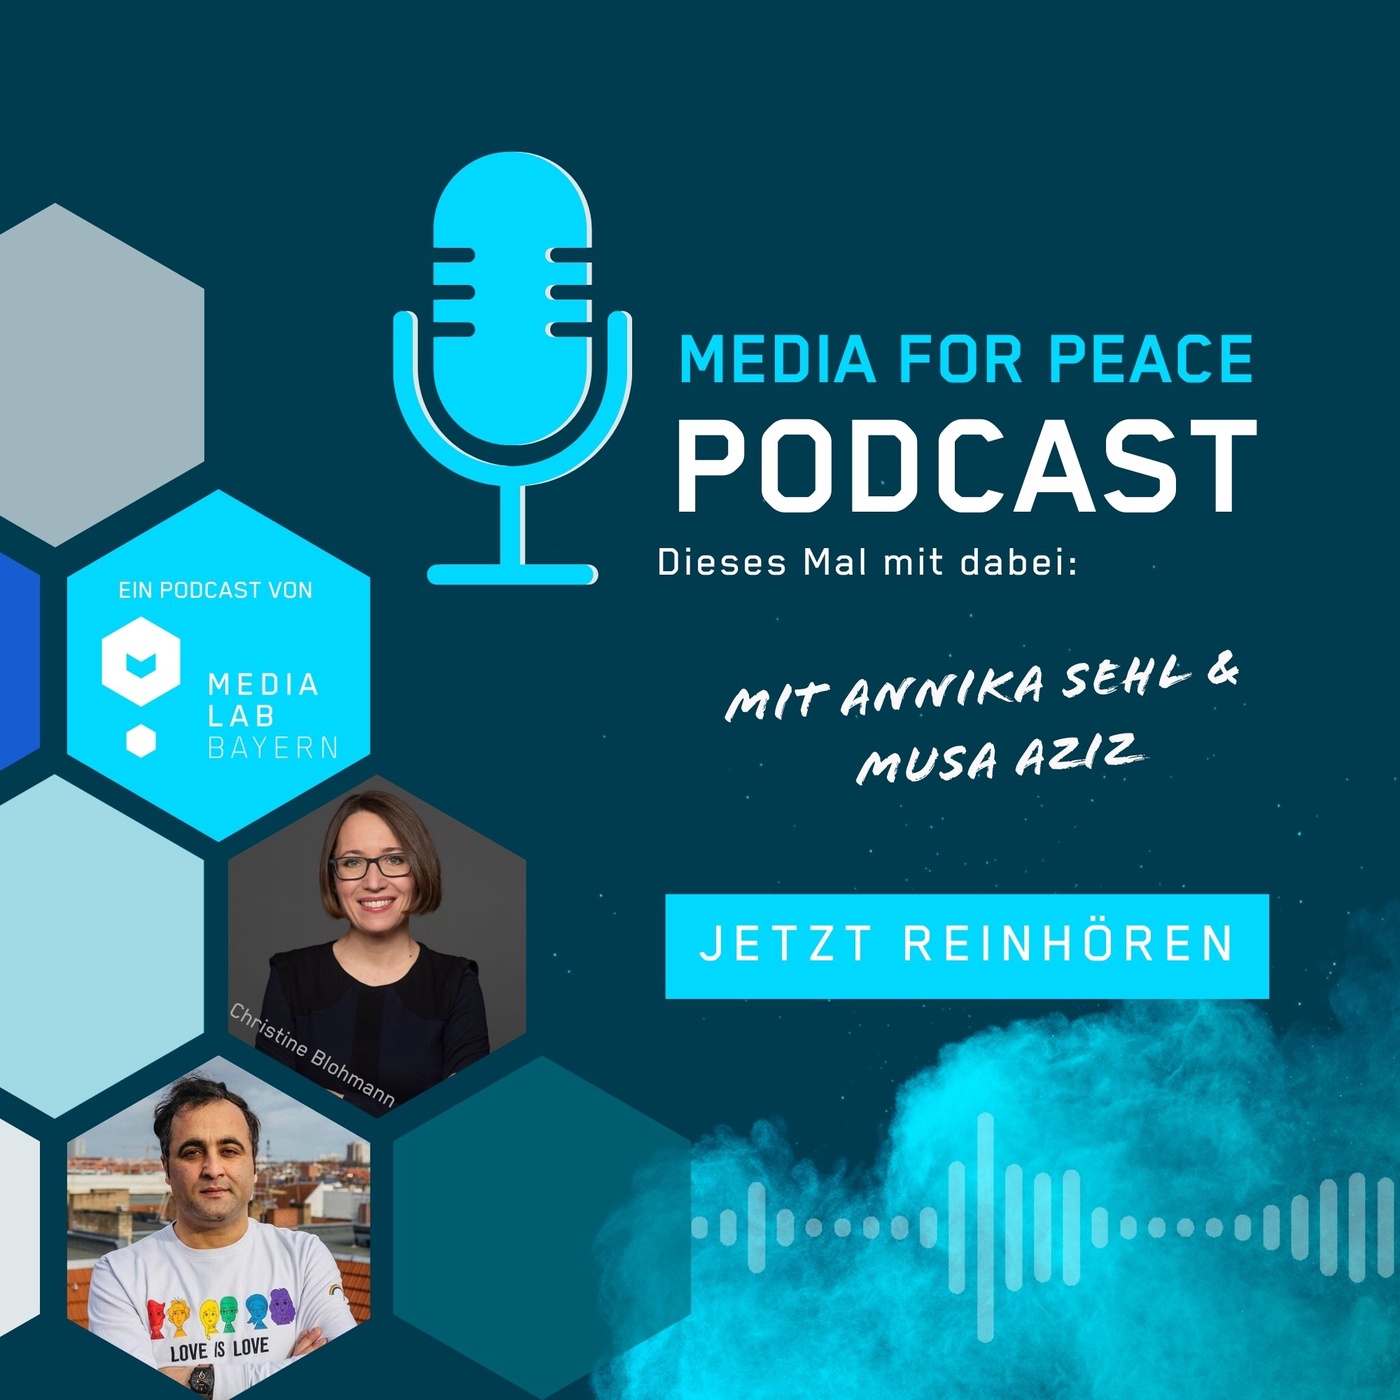 Media for Peace #8 Social Media: Journalistisches Tool mit Impact?